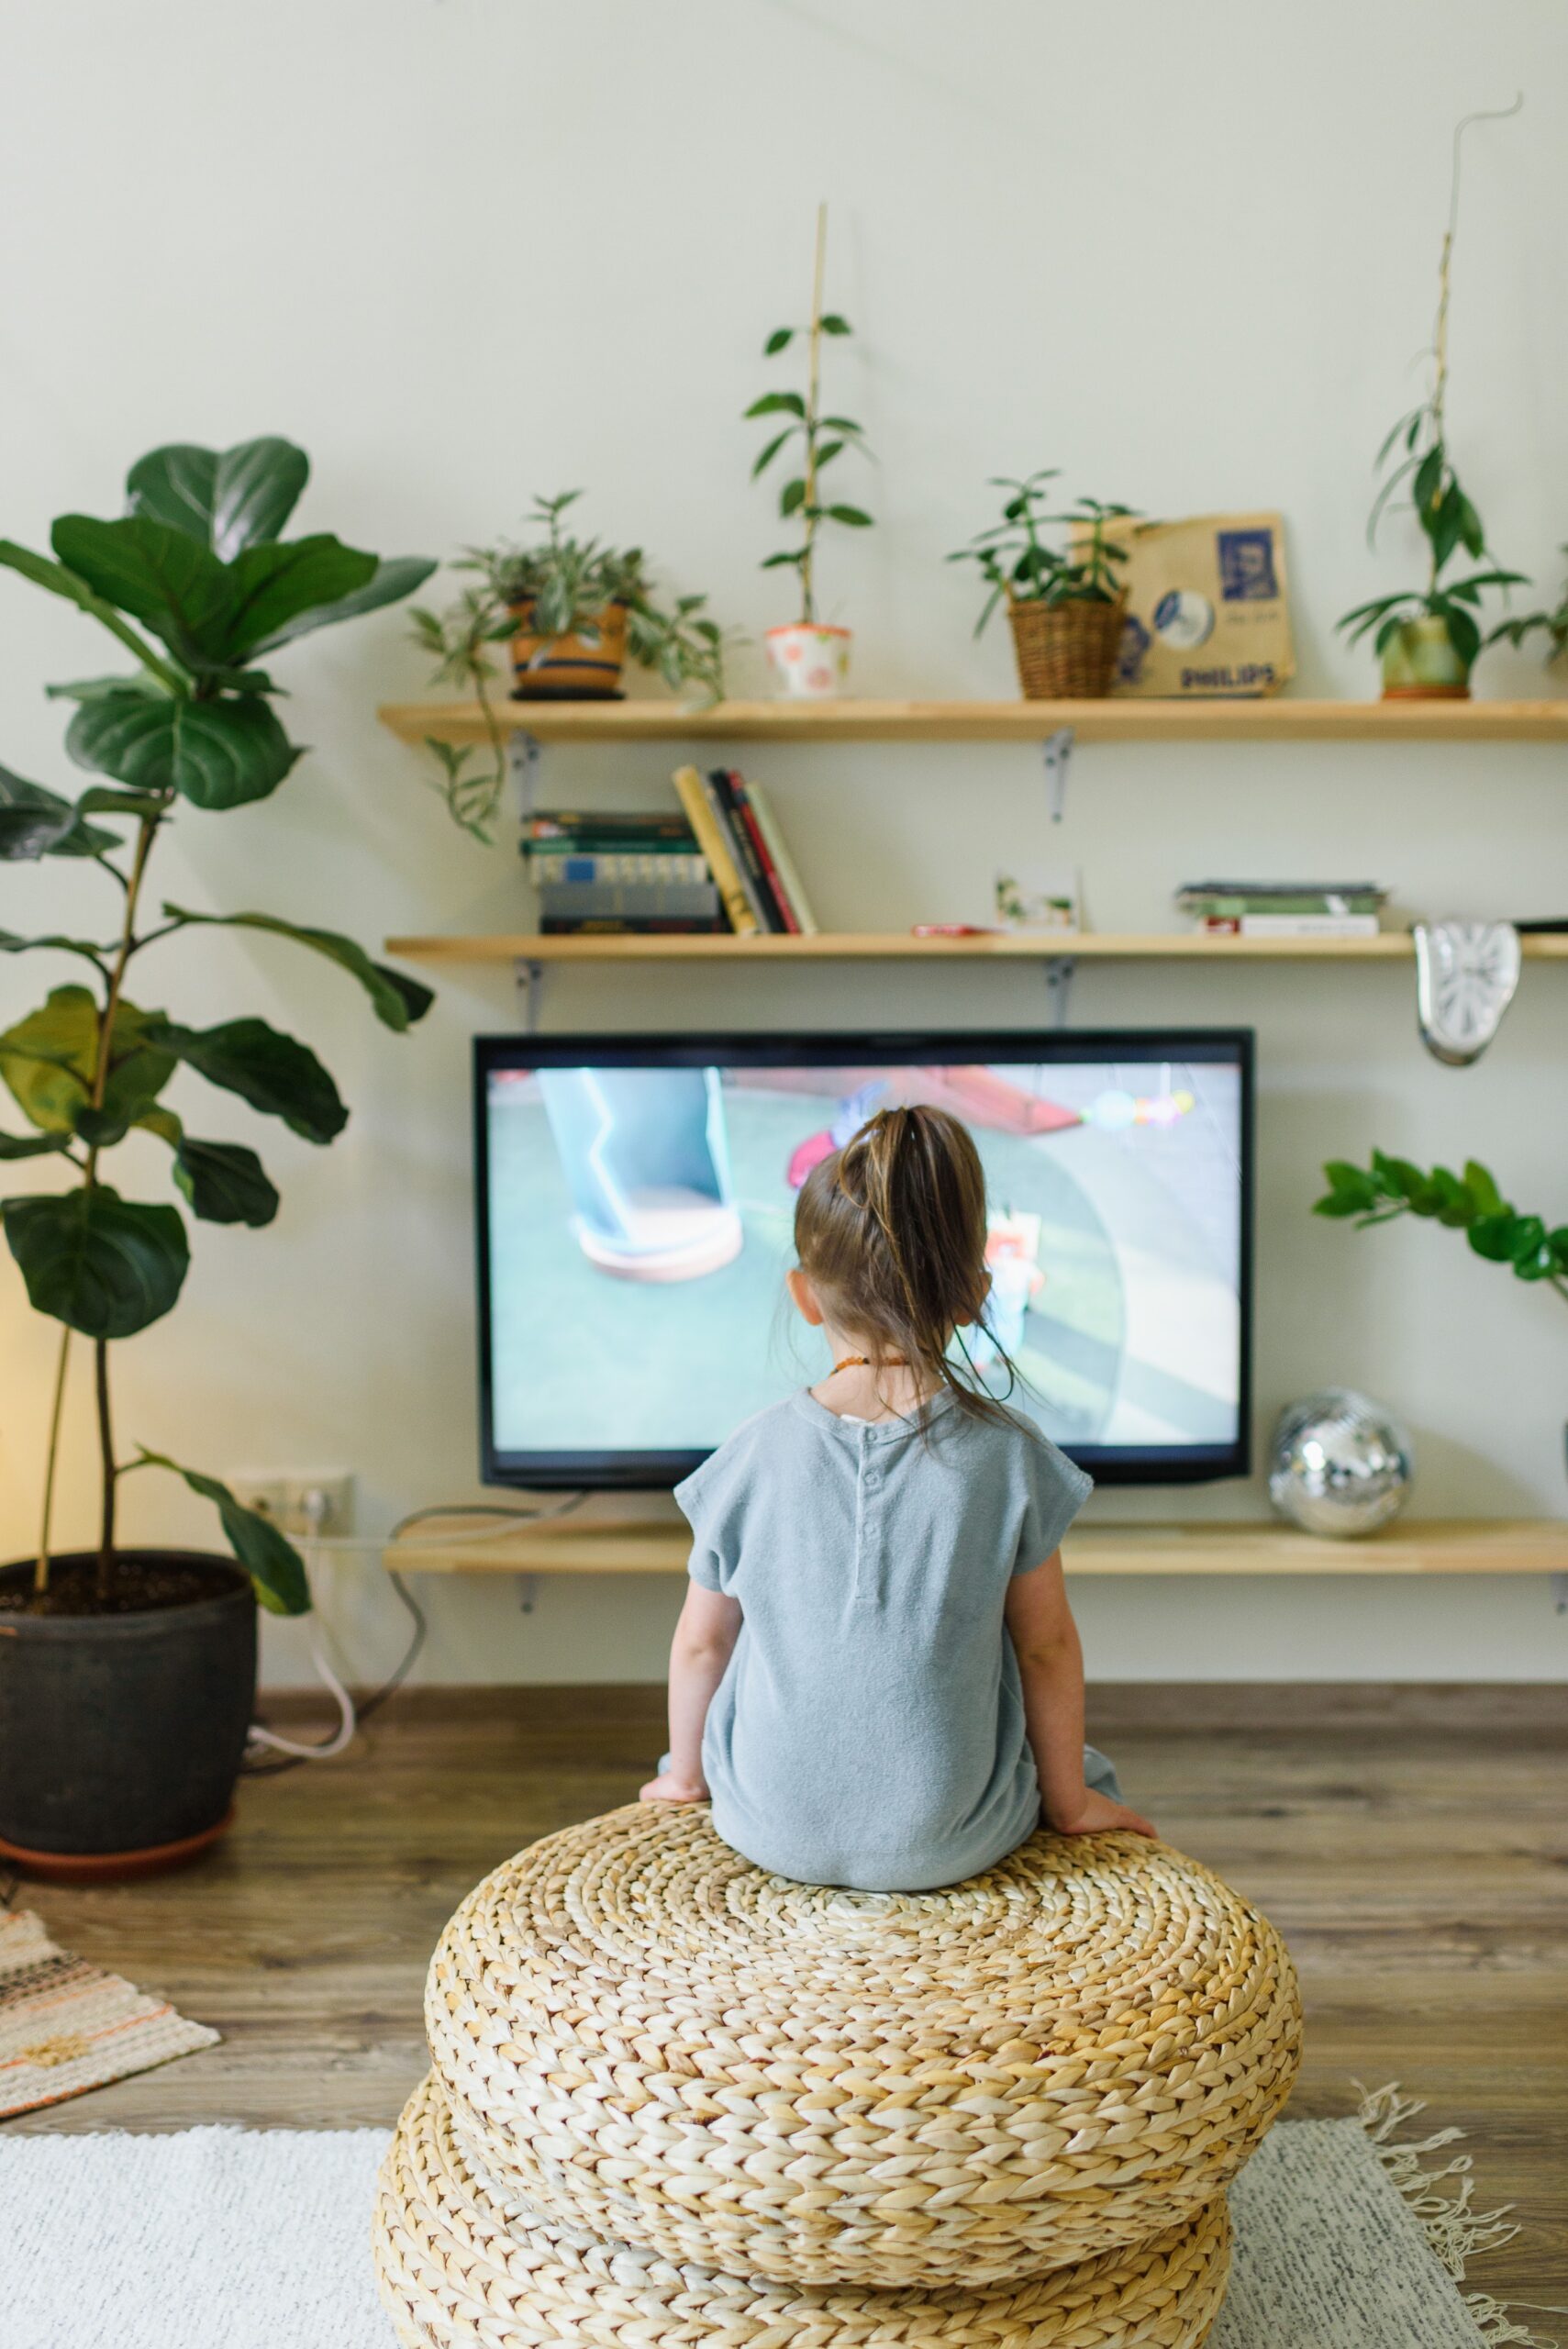 How to Reduce Screen Time for Your Family